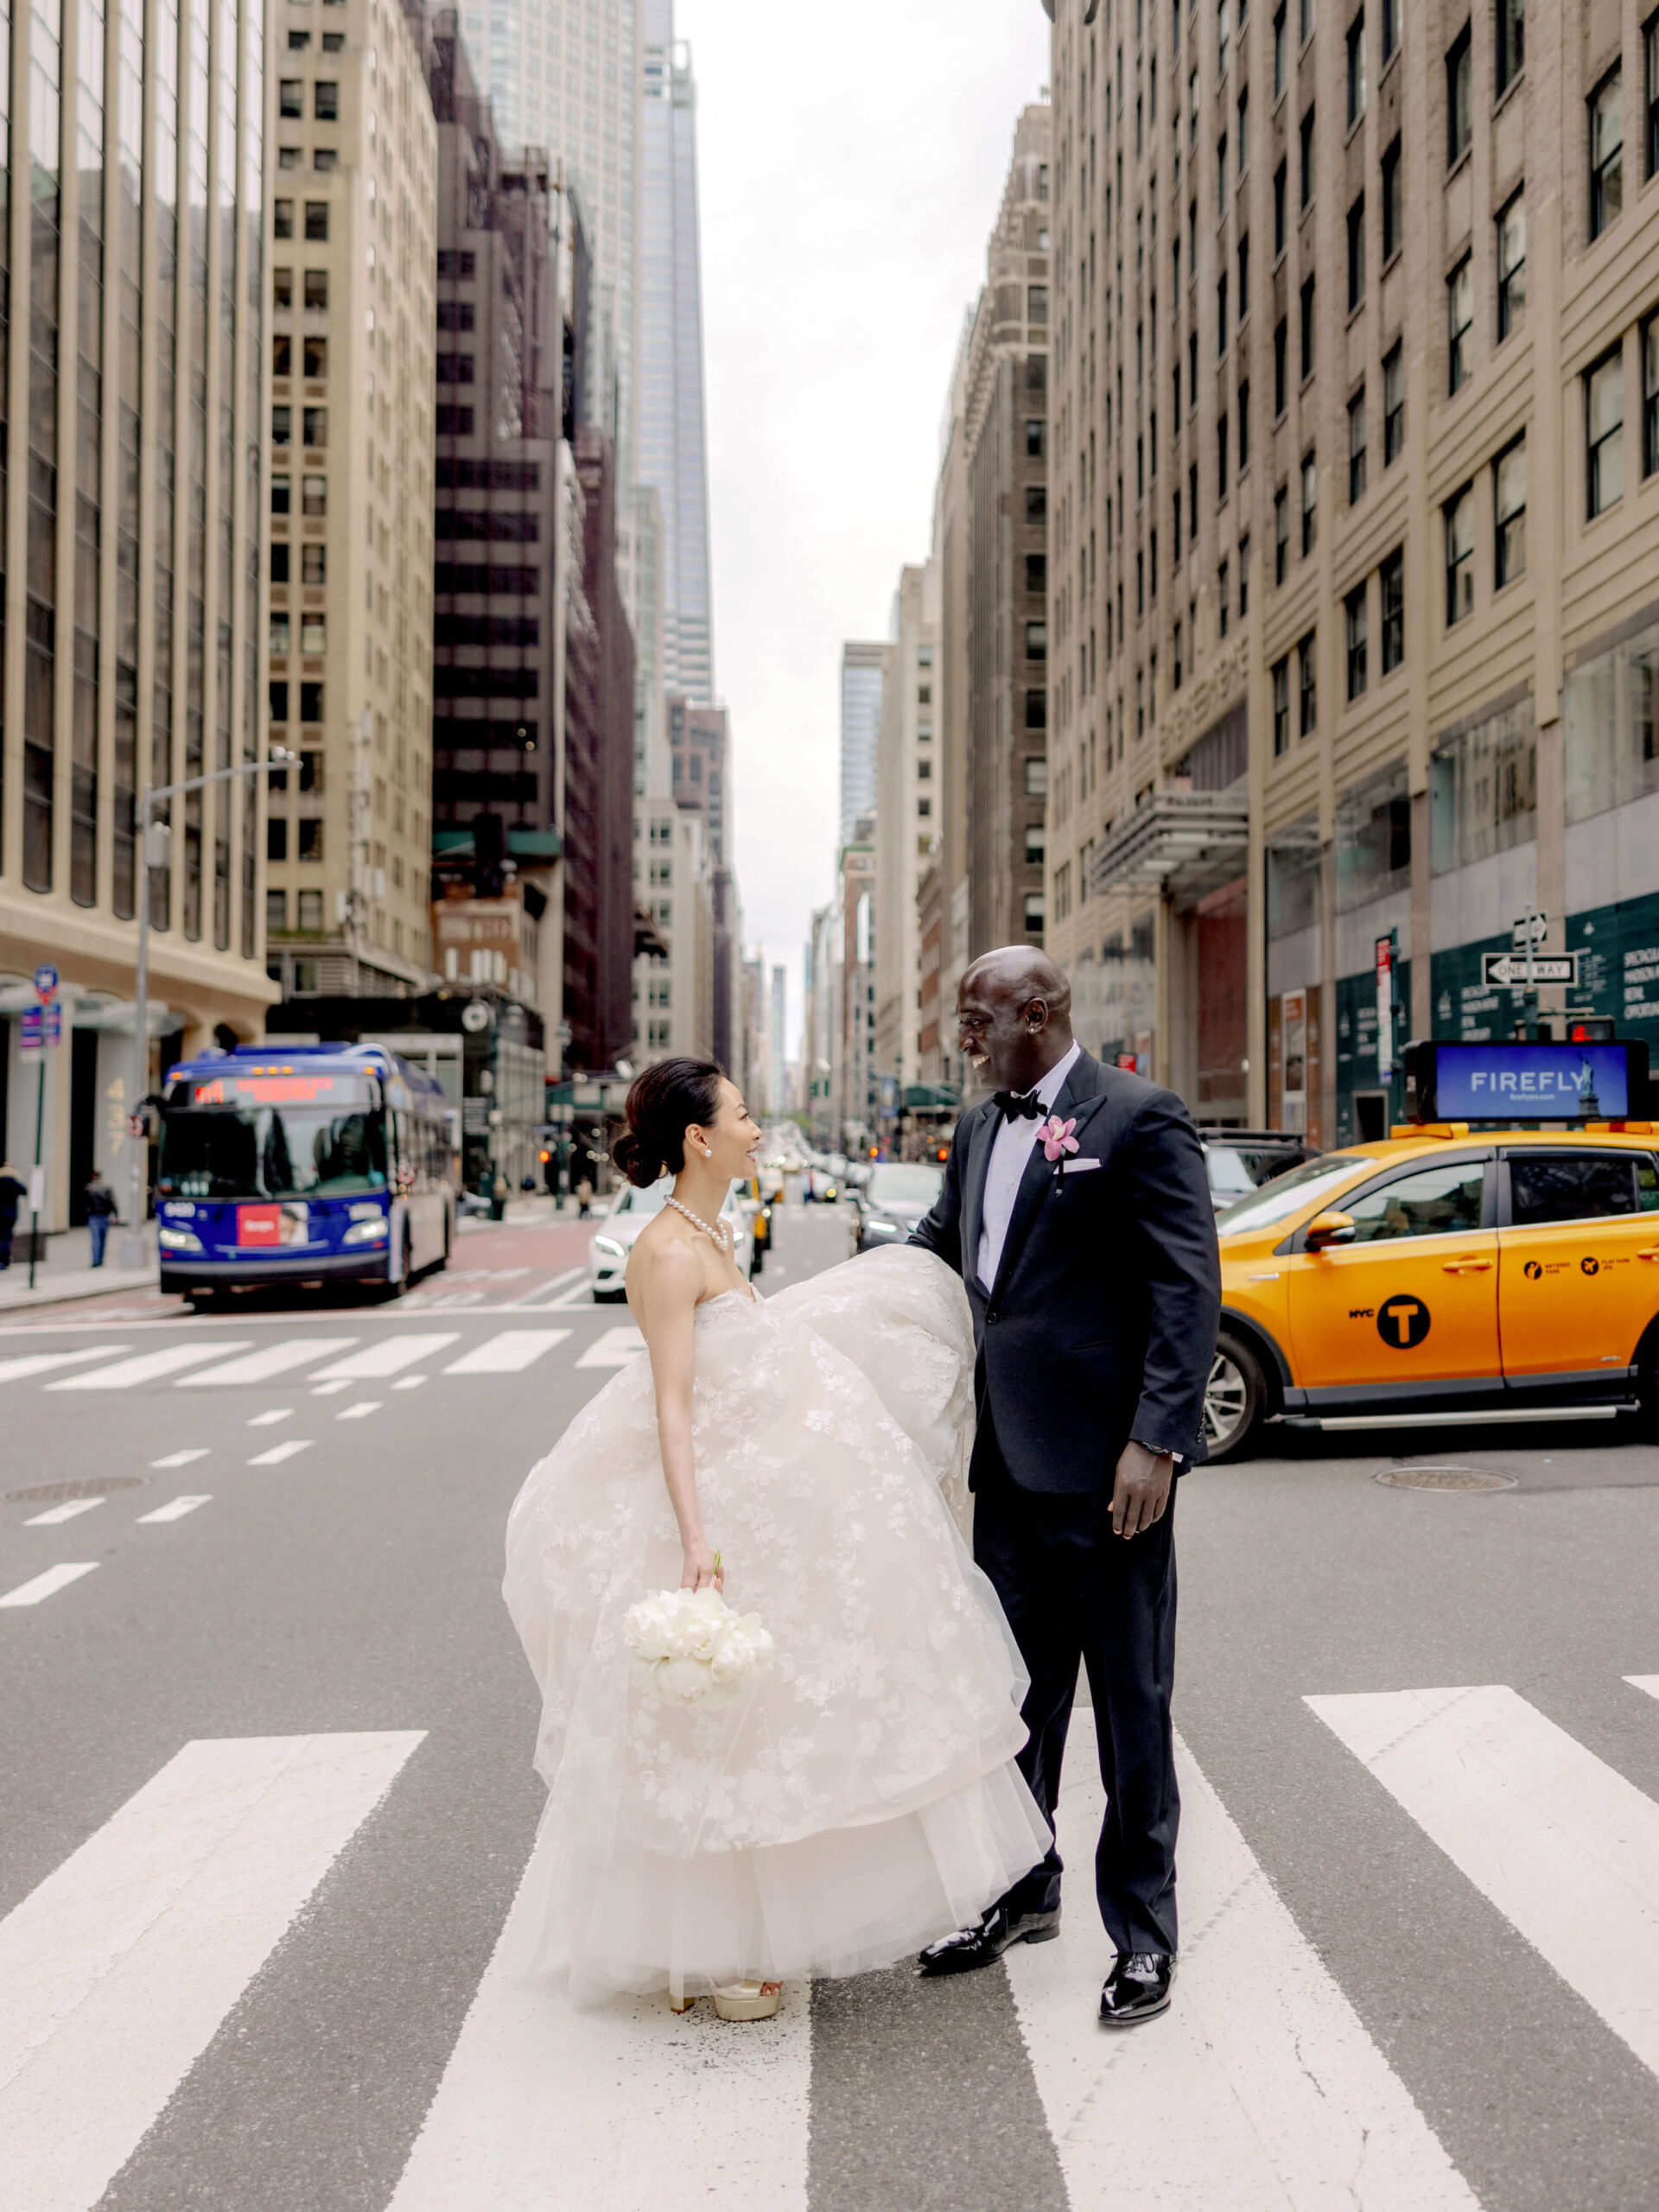 Editorial image of the bride and groom crossing the streets of NYC. Photojournalistic image by Jenny Fu Studio